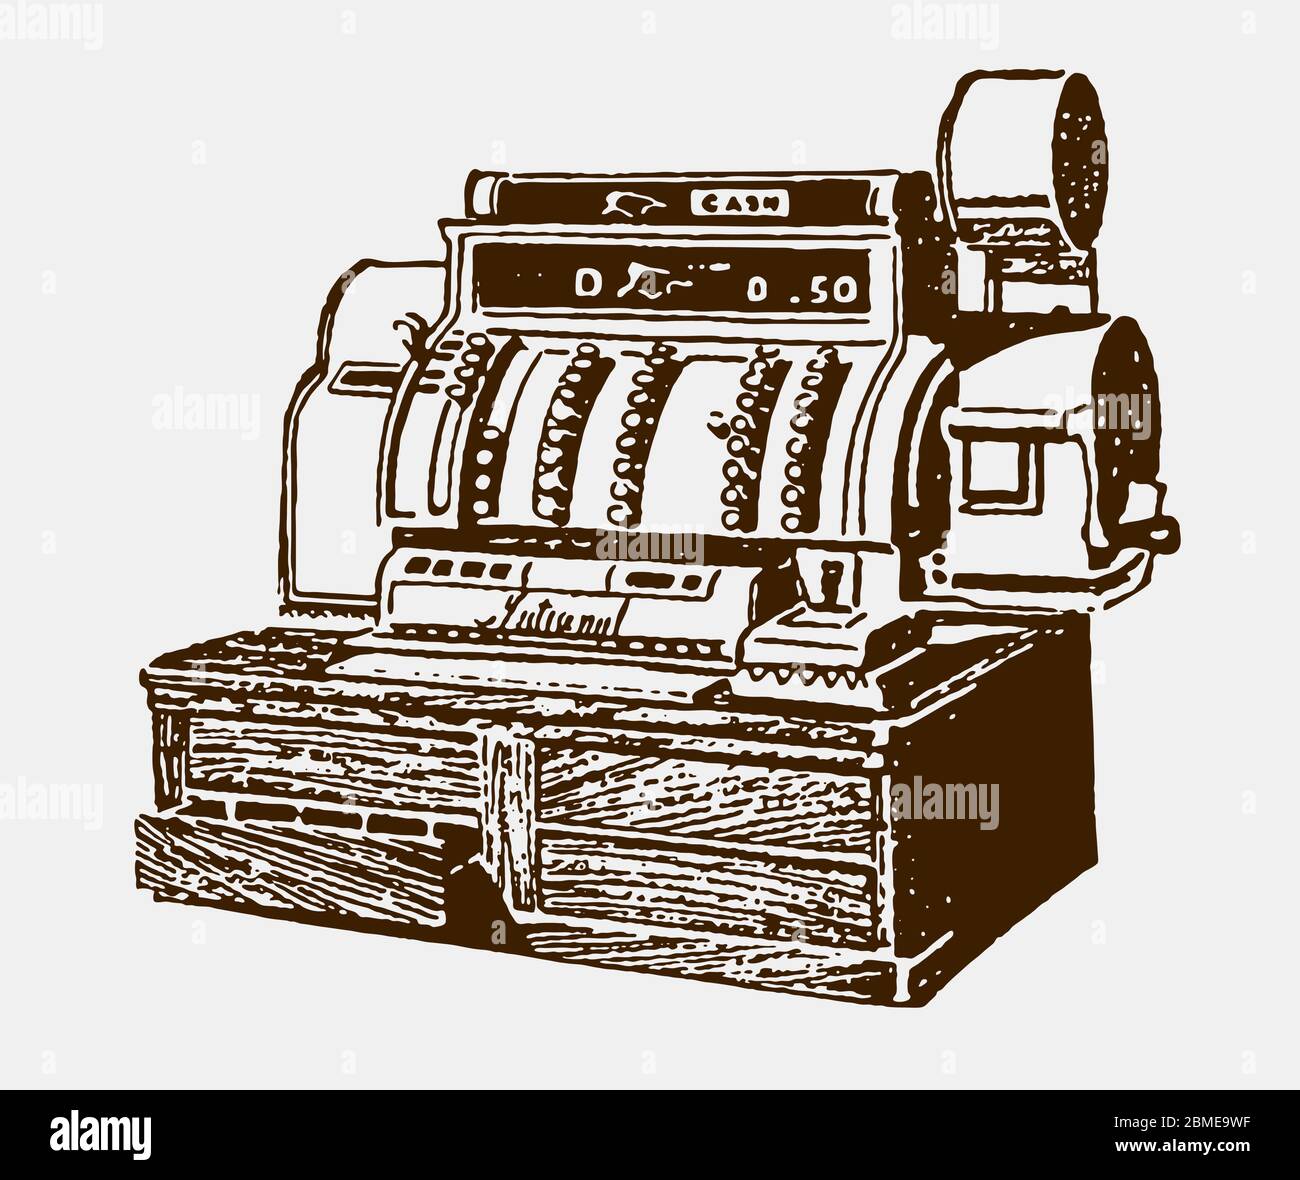 Antique crank-operated cash register or till from the early 20th century Stock Vector